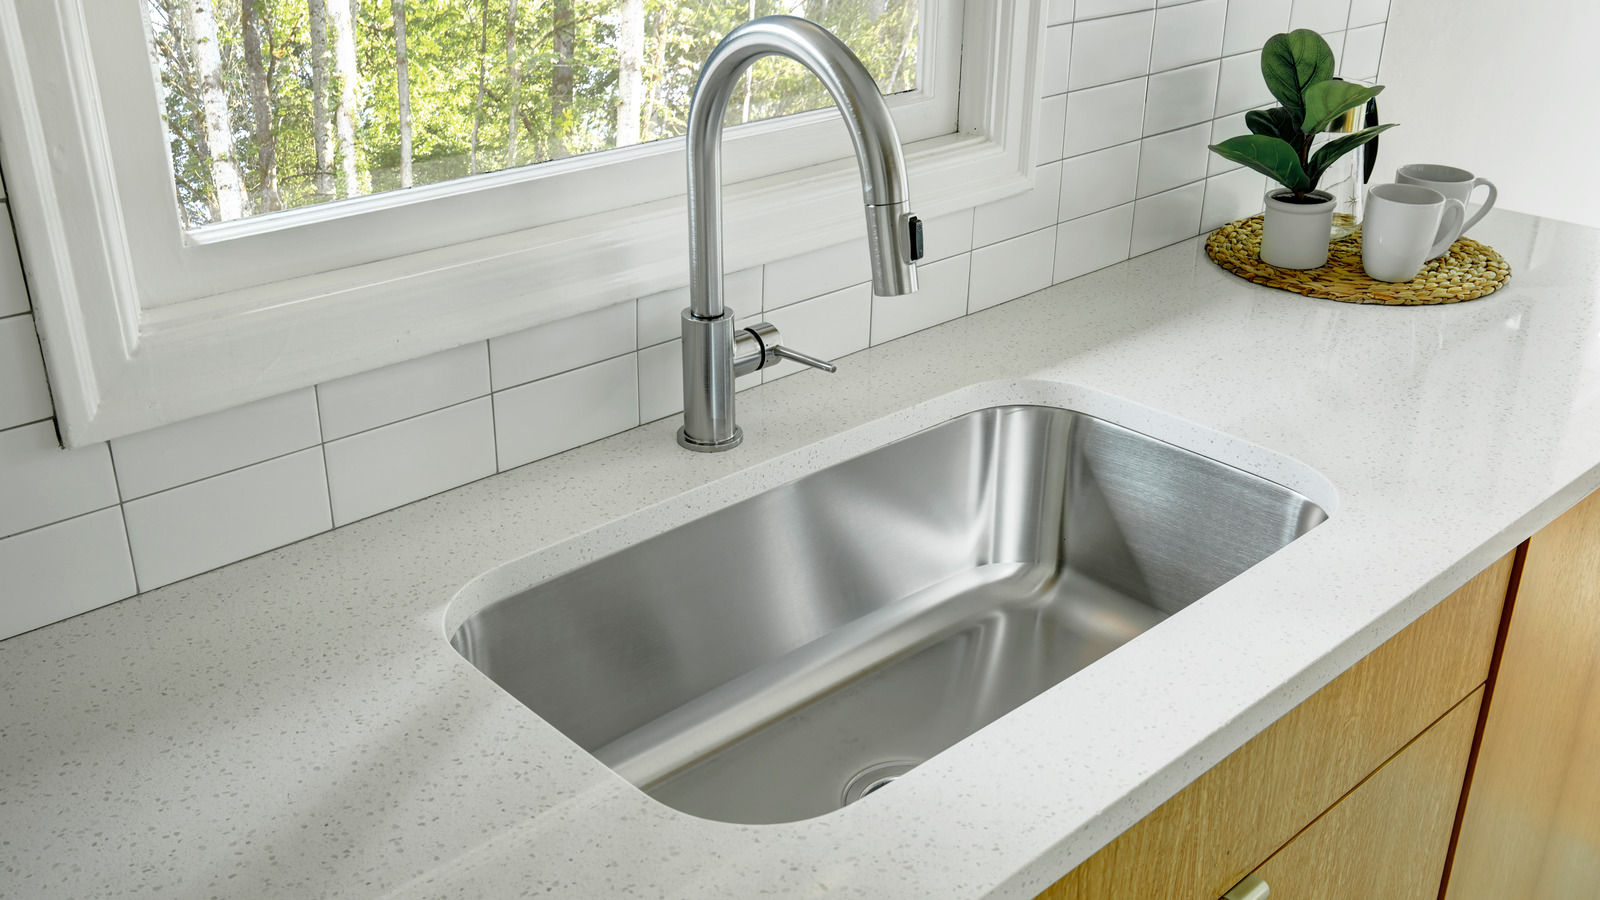 https://www.housedigest.com/img/gallery/how-to-choose-which-style-undermount-sink-is-right-for-your-kitchen/l-intro-1679060915.jpg